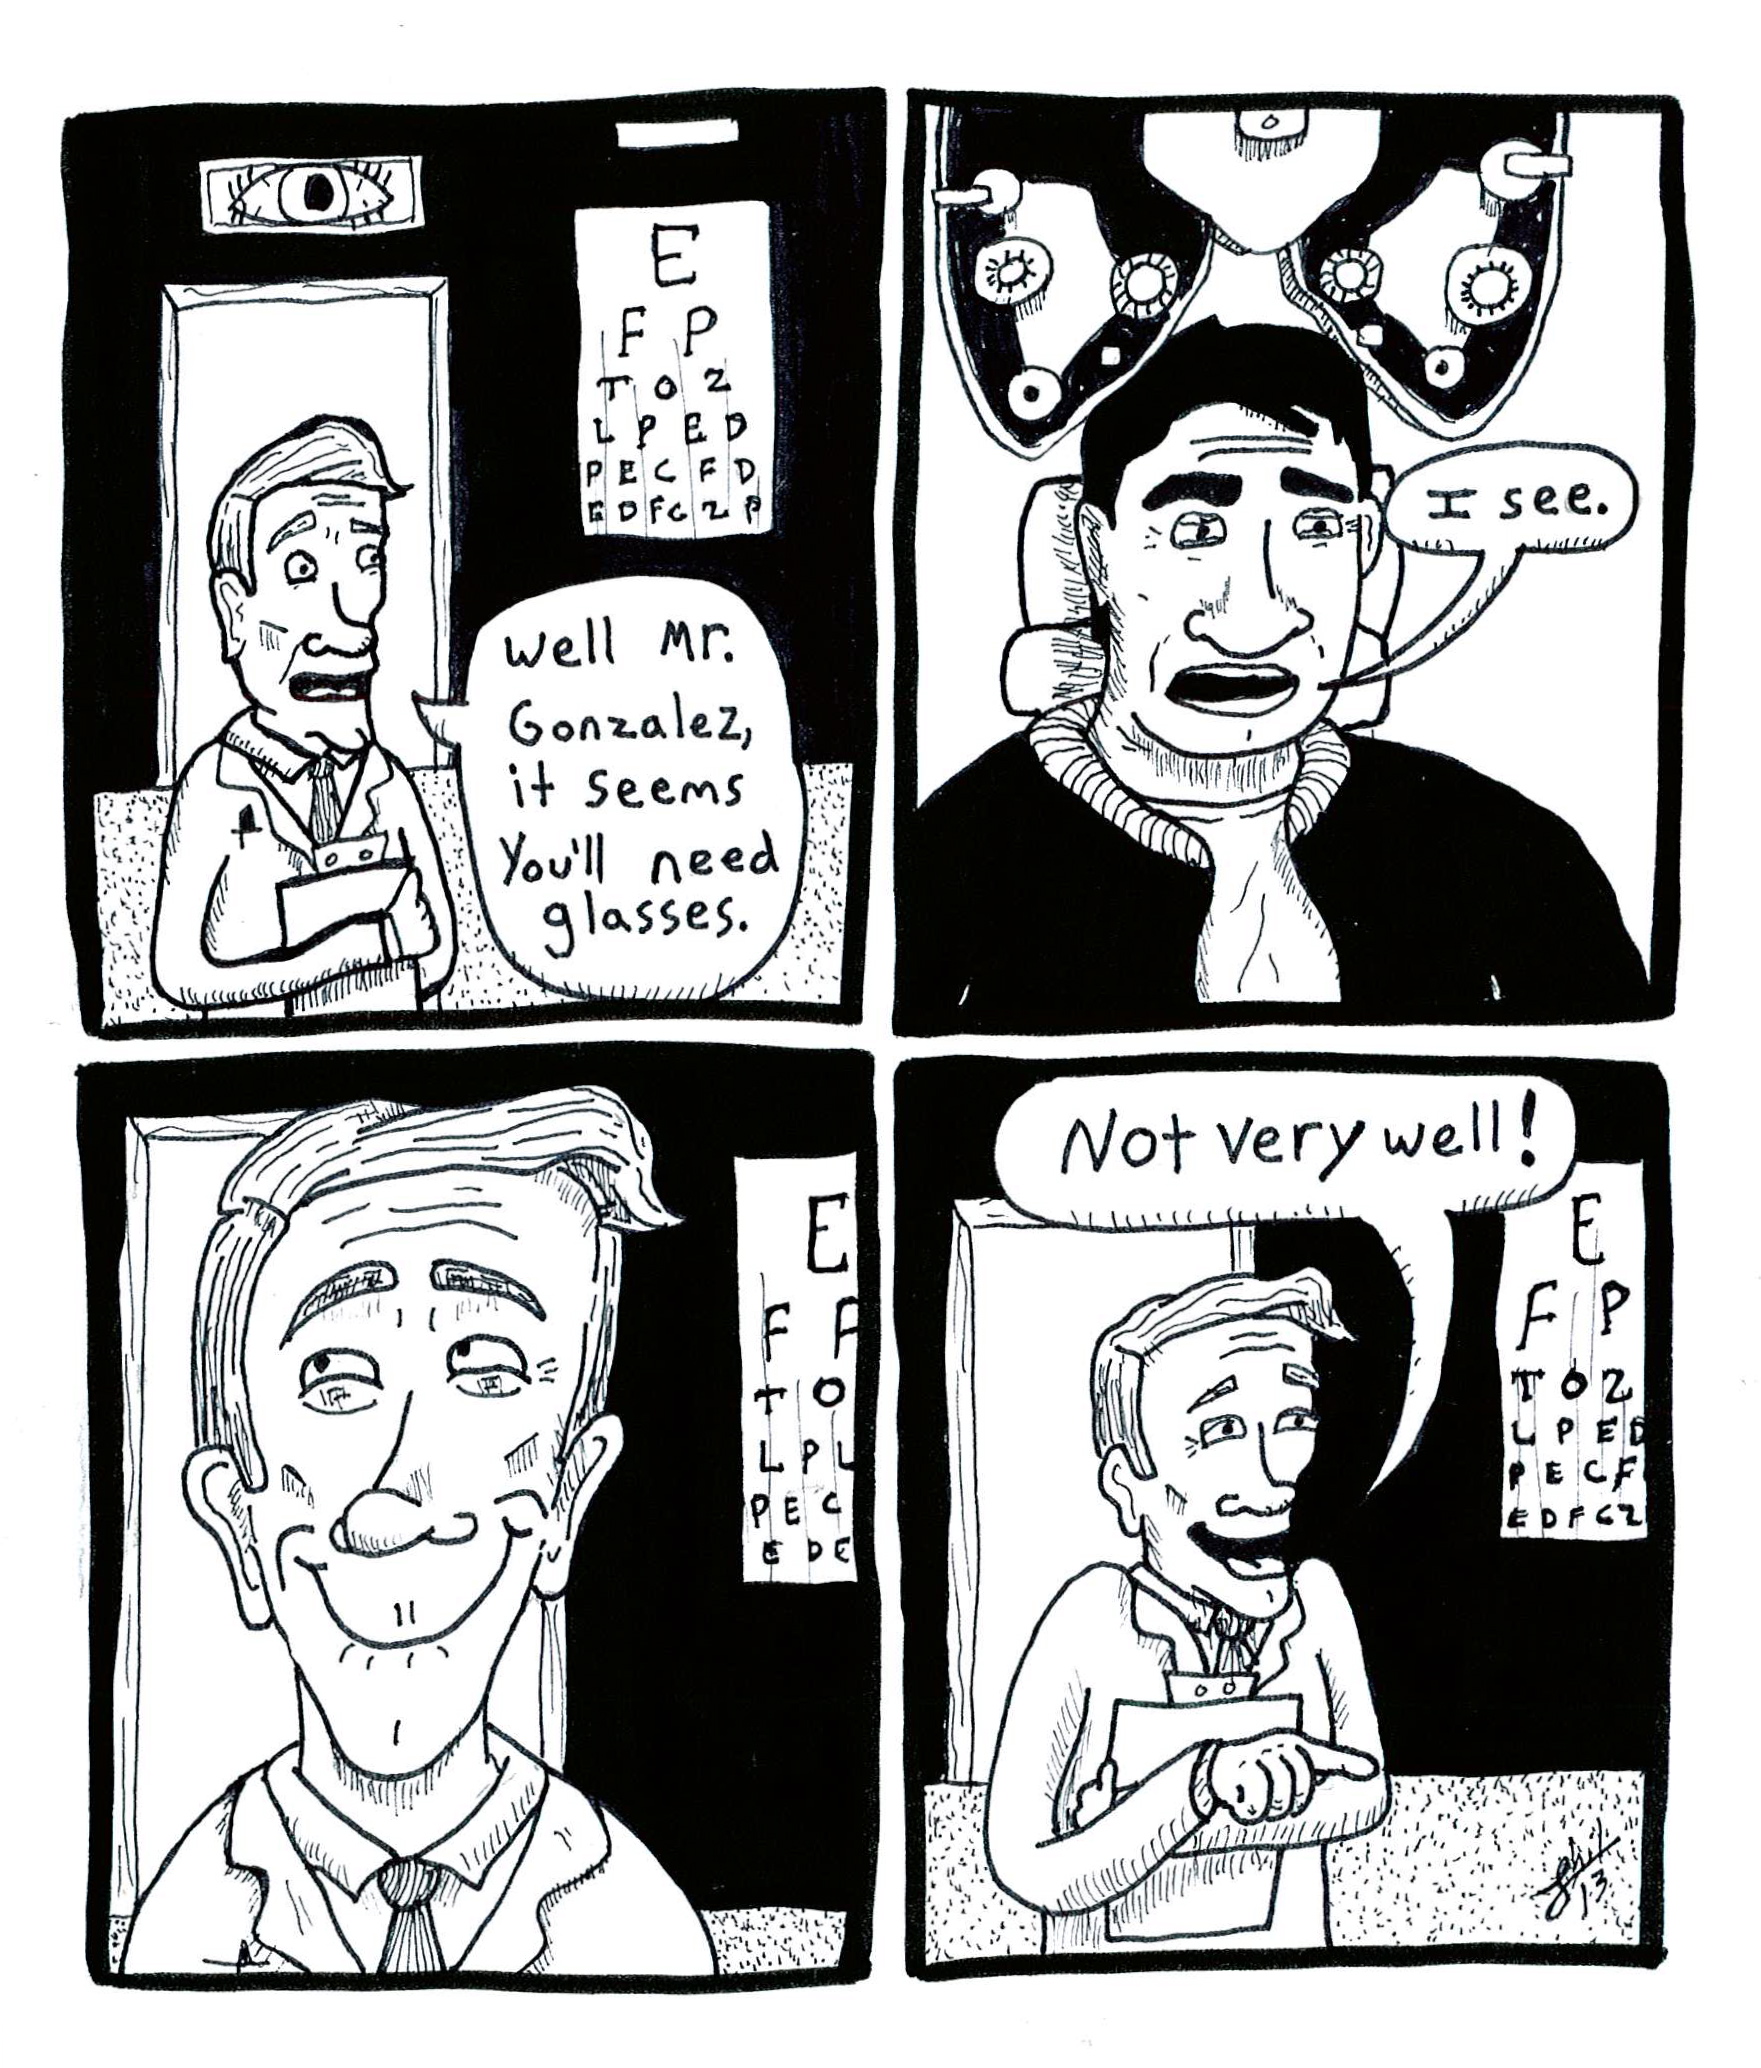 Comic strip illustrating a man at his eye appointment: the doctor tells the man that he will need glasses, and when he responds with "I see," the doctor laughs and says "Not very well!"